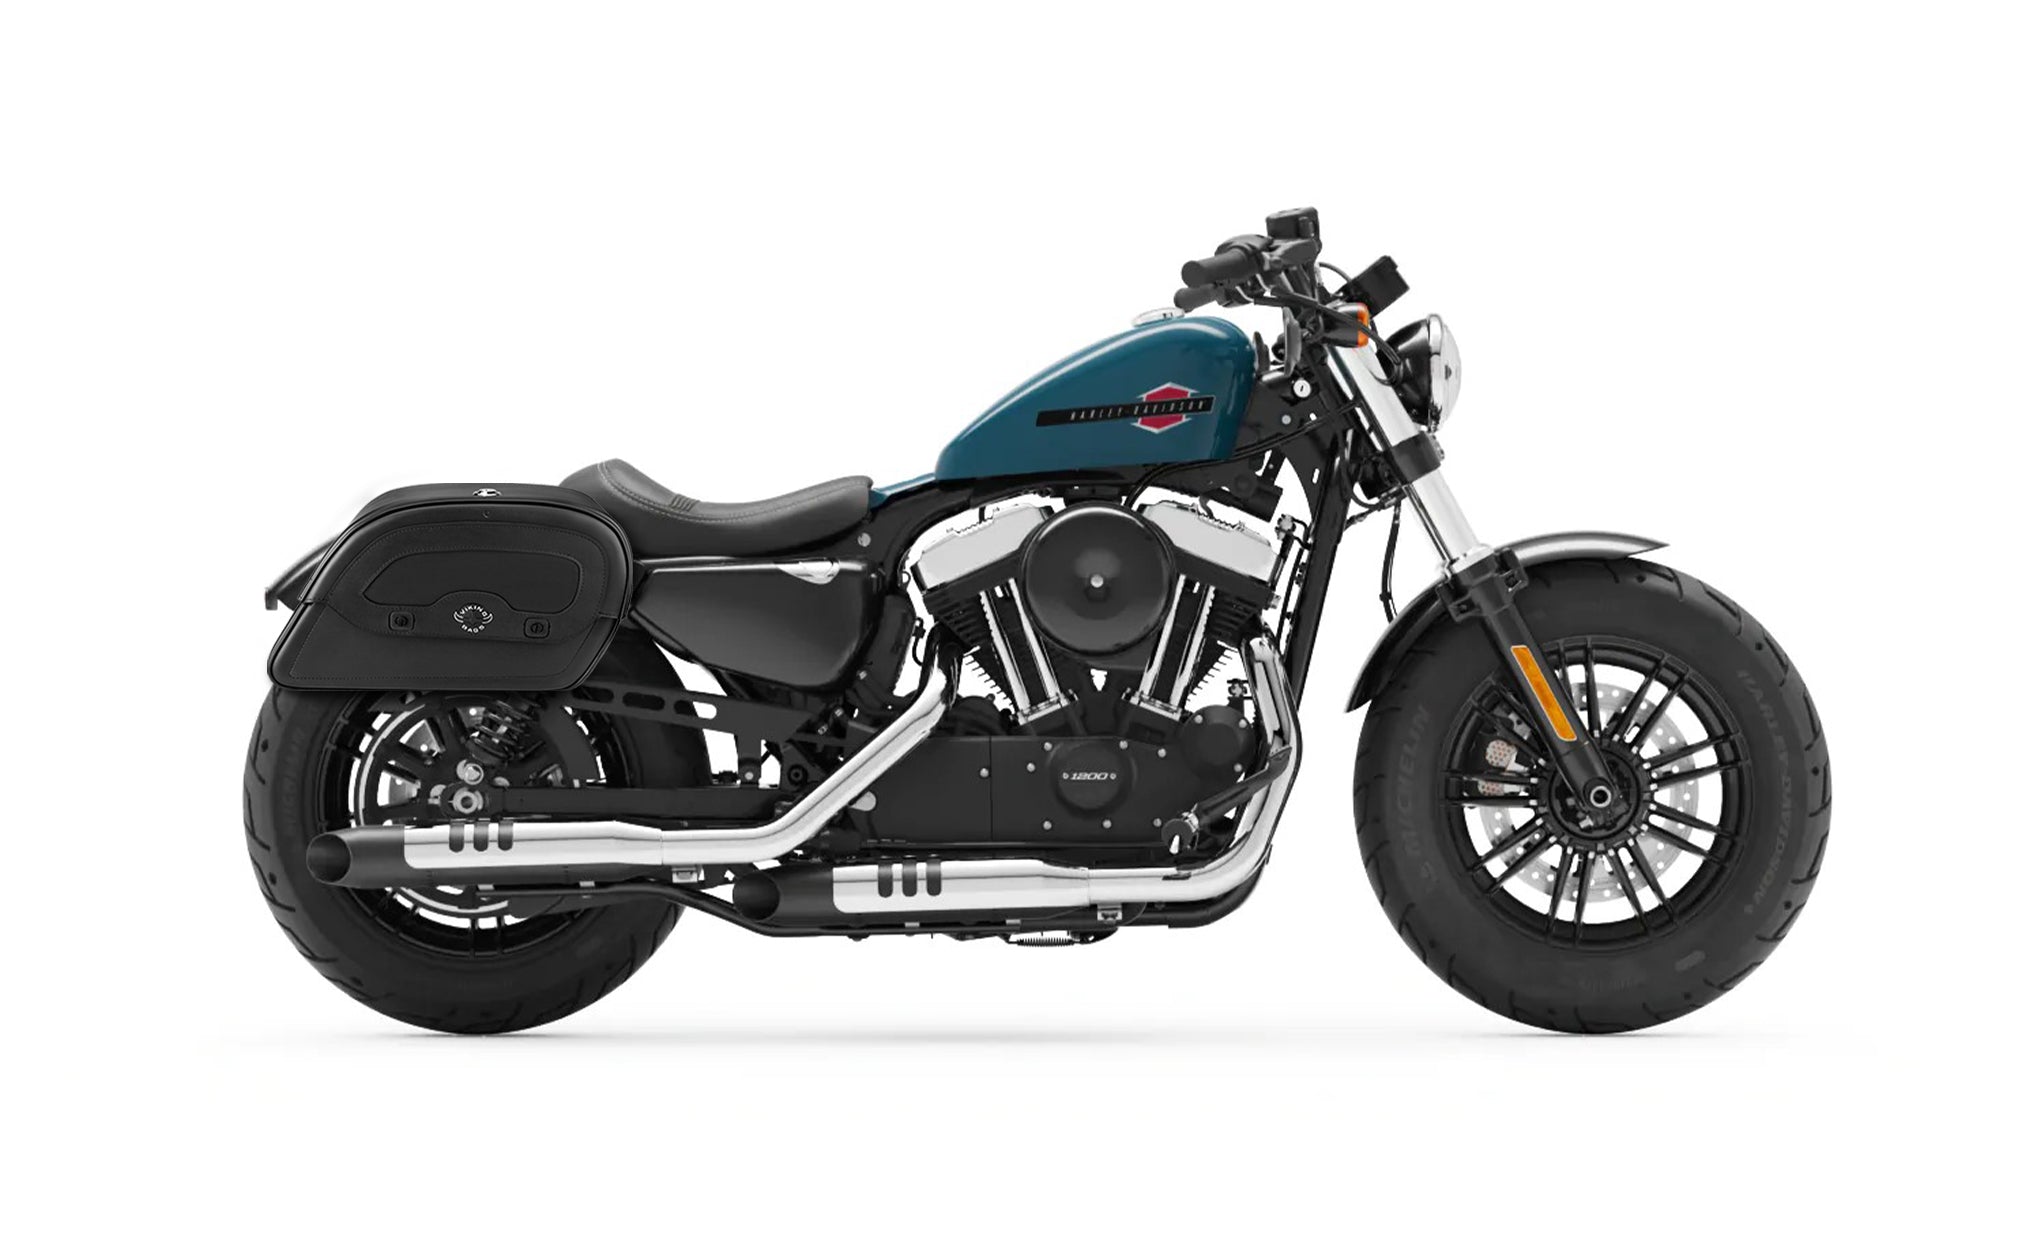 22L - Warrior Medium Quick-Mount Motorcycle Saddlebags For Harley Sportster Forty Eight 48 @expand